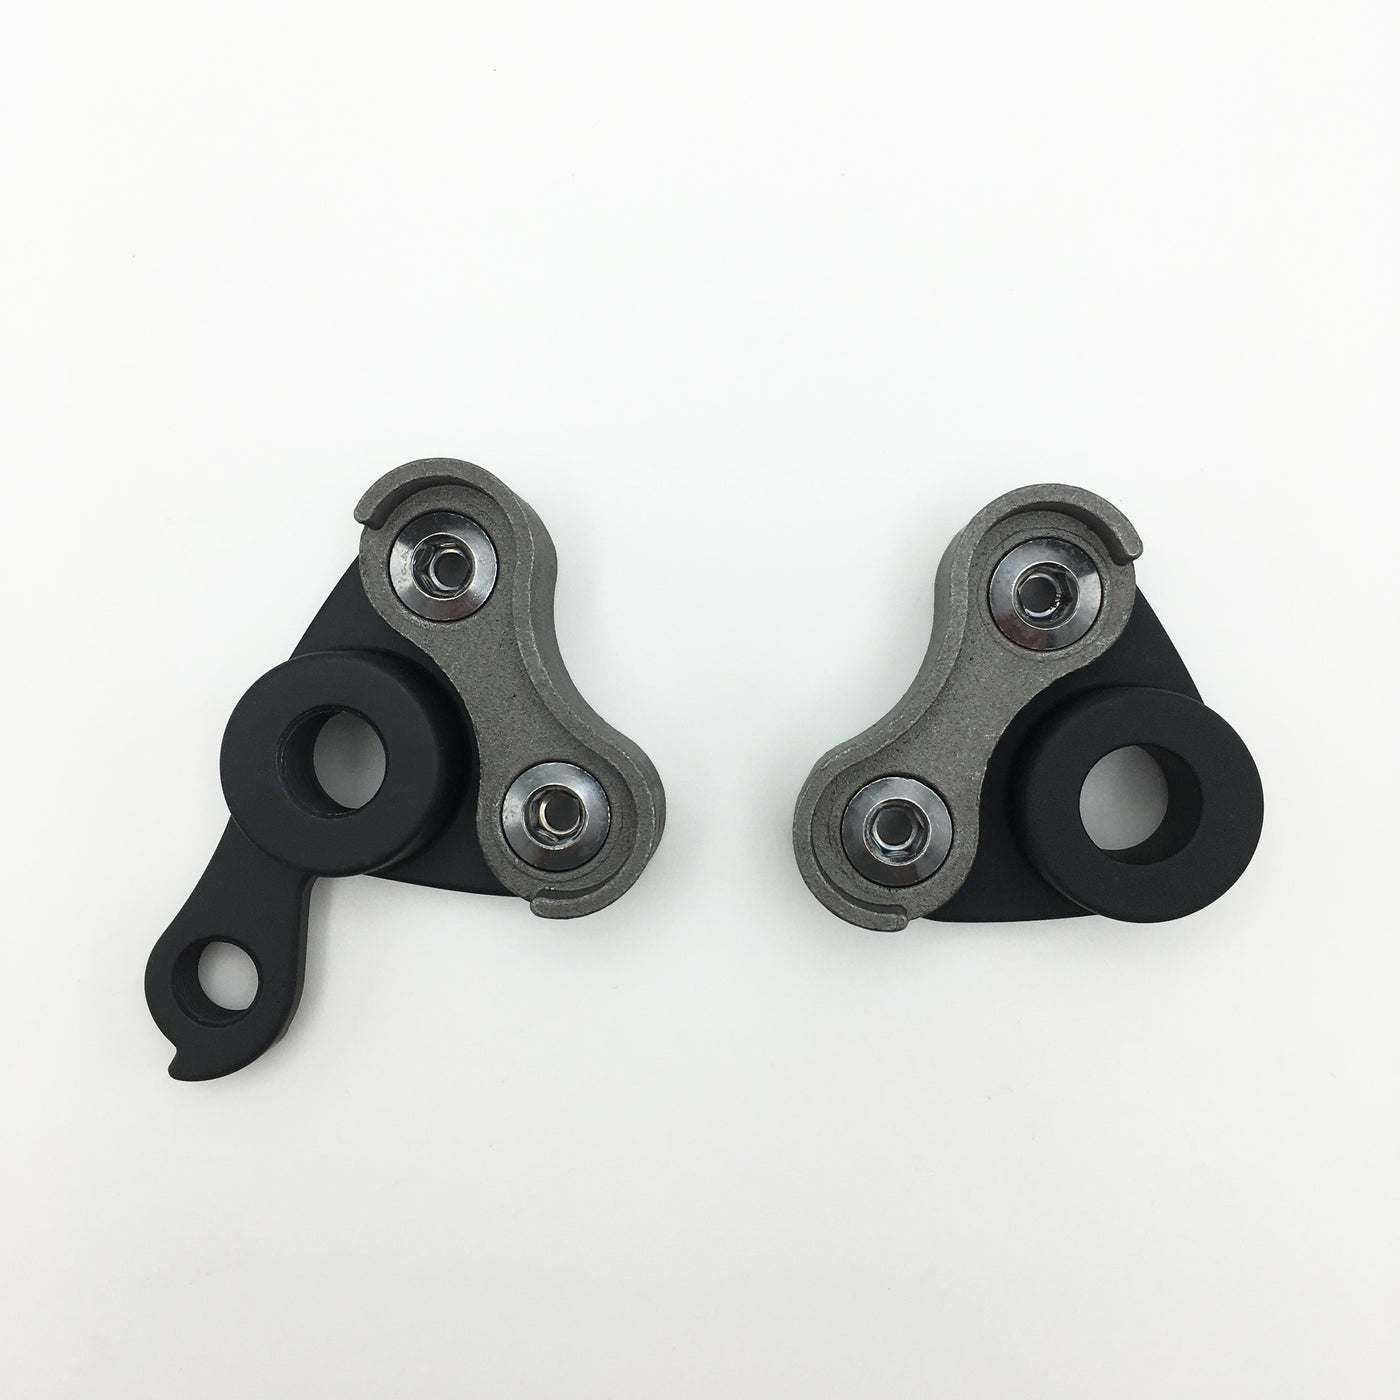 Complete thru-axle modular dropout set - with/without eyelets 142/12 - 1.5 thread pitch